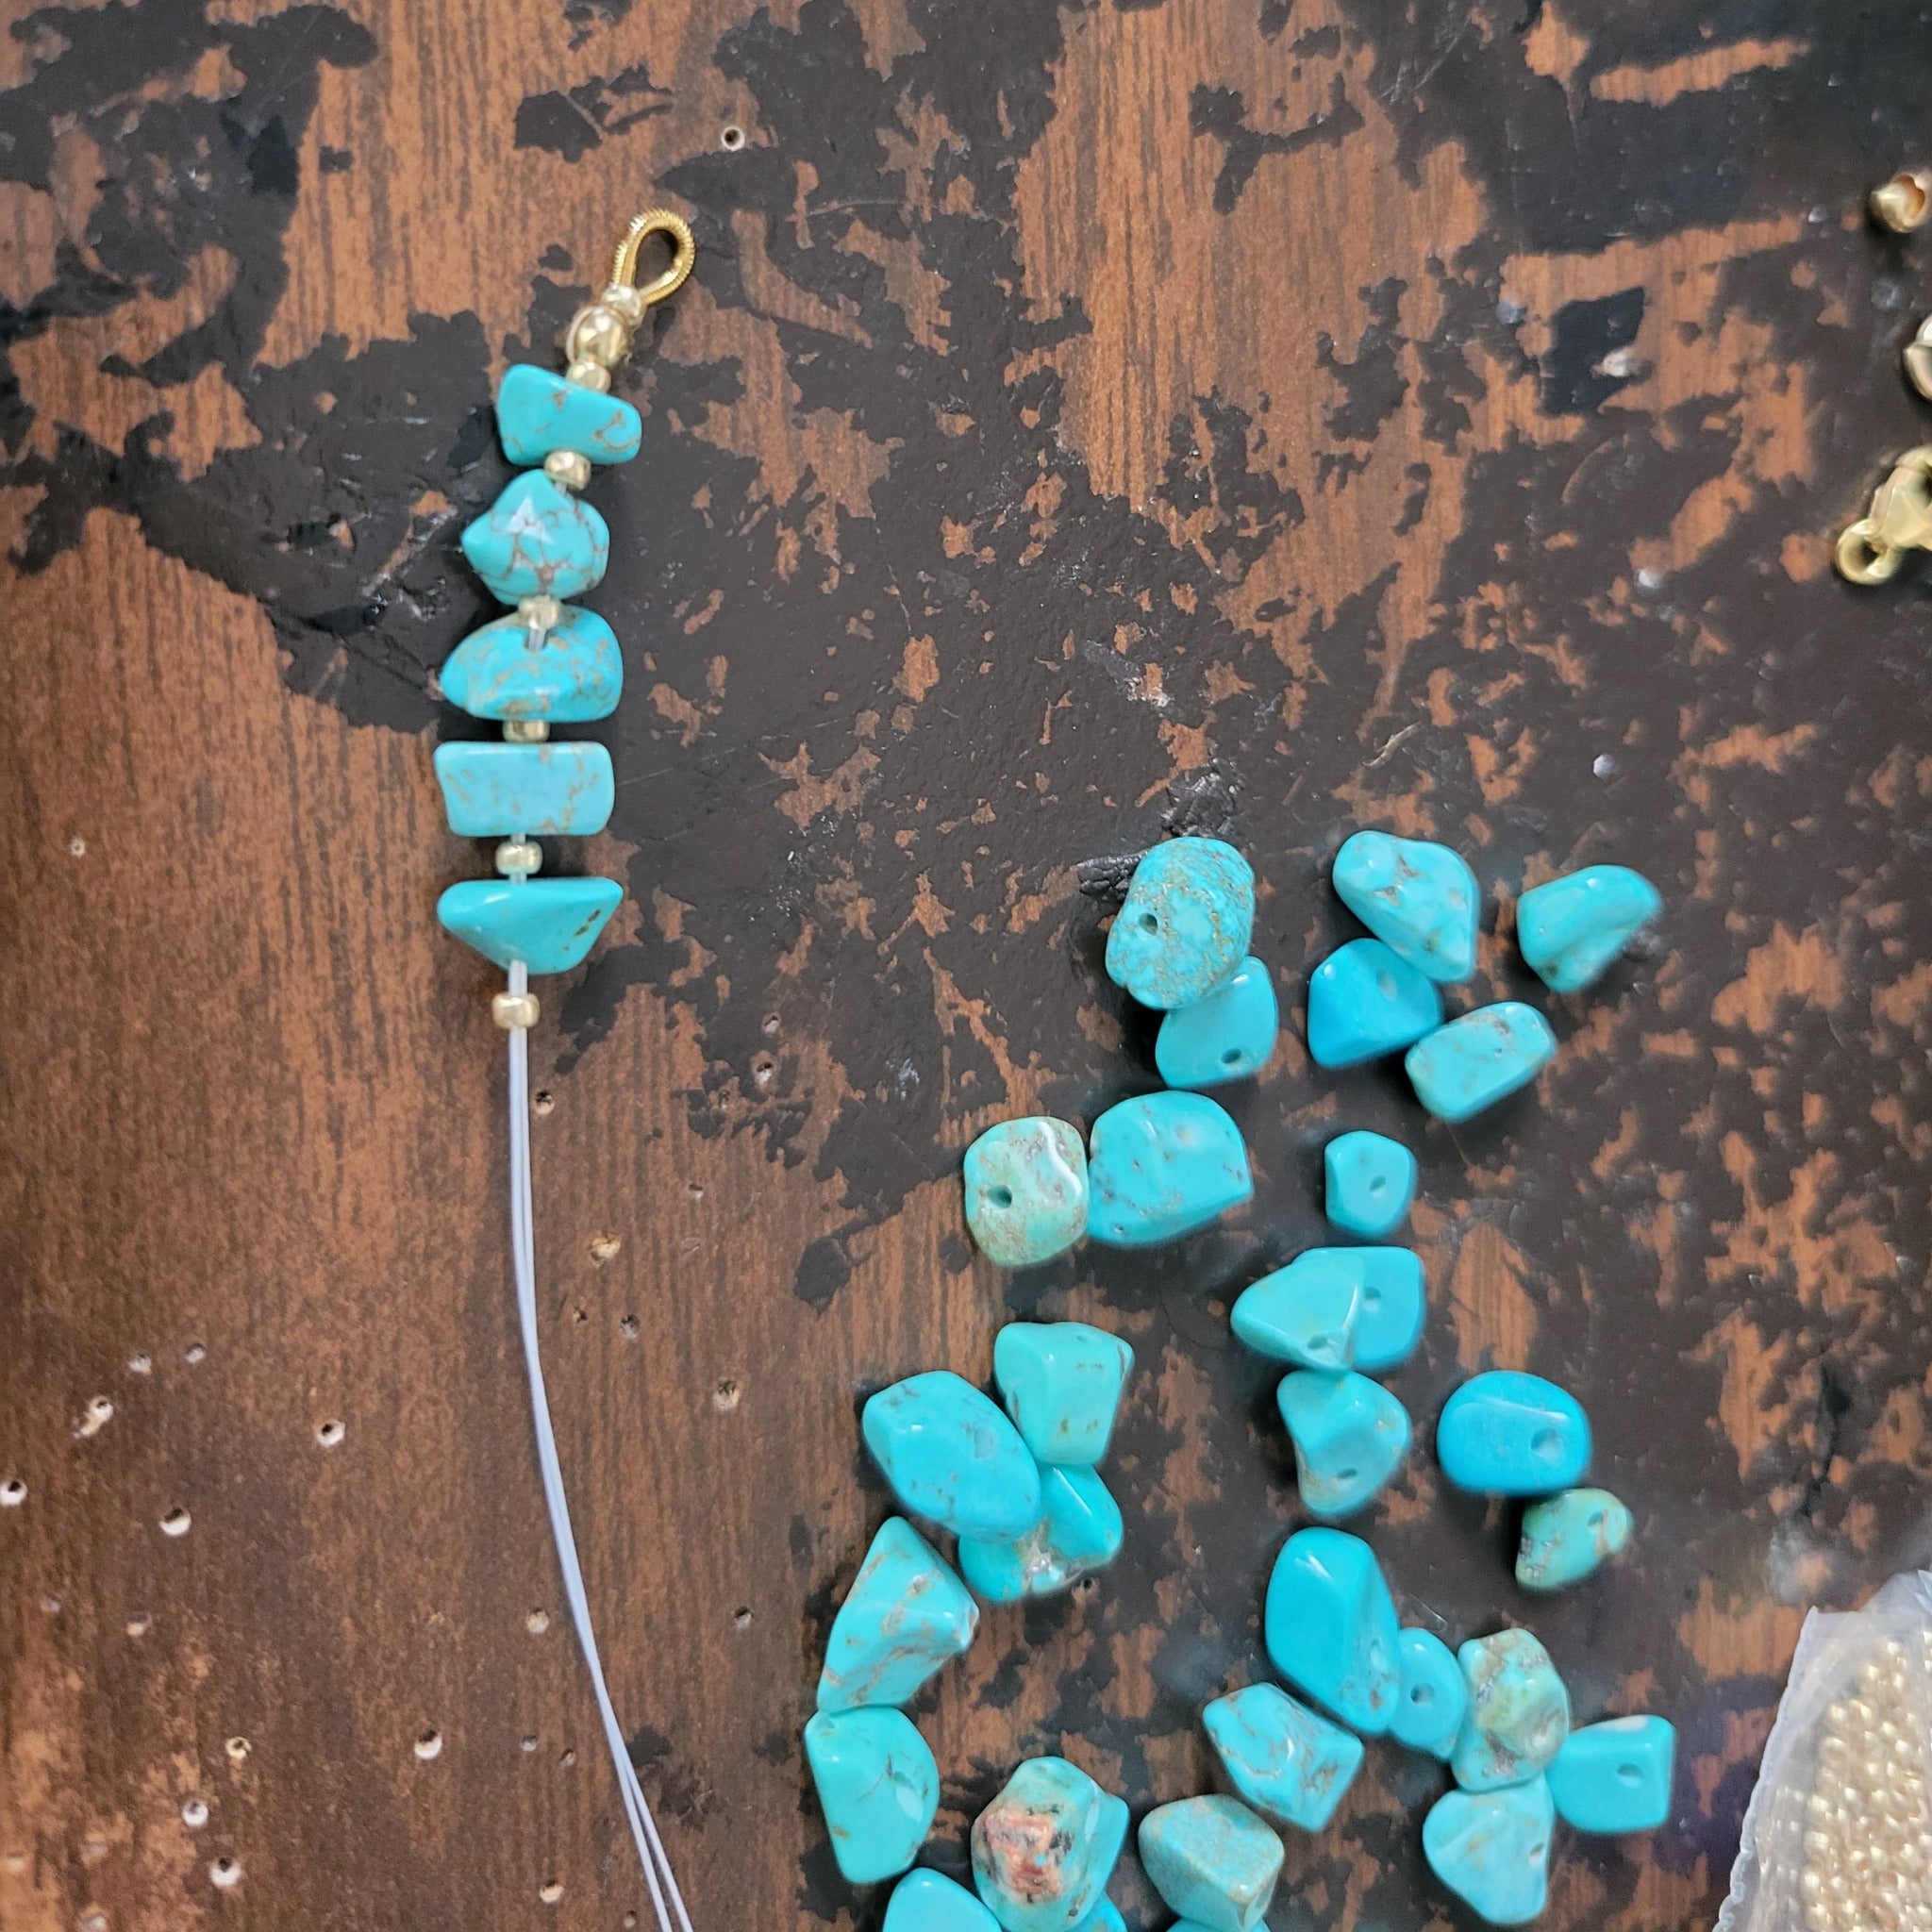 Real Turquoise and 14kt Gold Beaded Necklace, Bracelet, Earrings, or Set